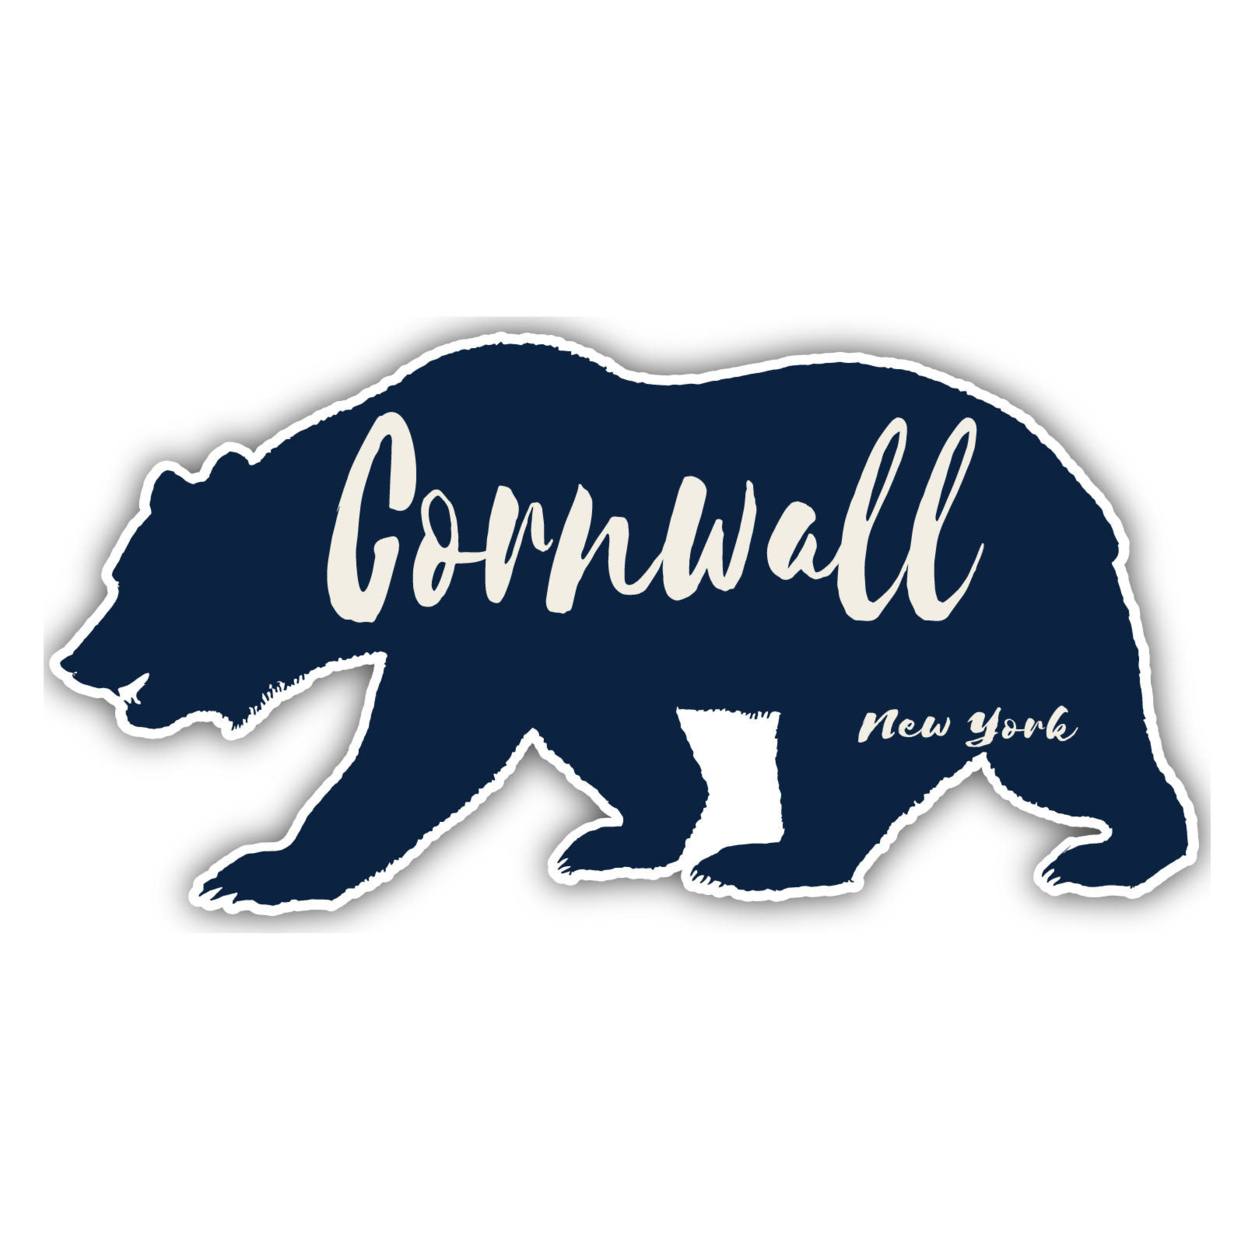 Cornwall New York Souvenir Decorative Stickers (Choose Theme And Size) - 4-Pack, 12-Inch, Bear